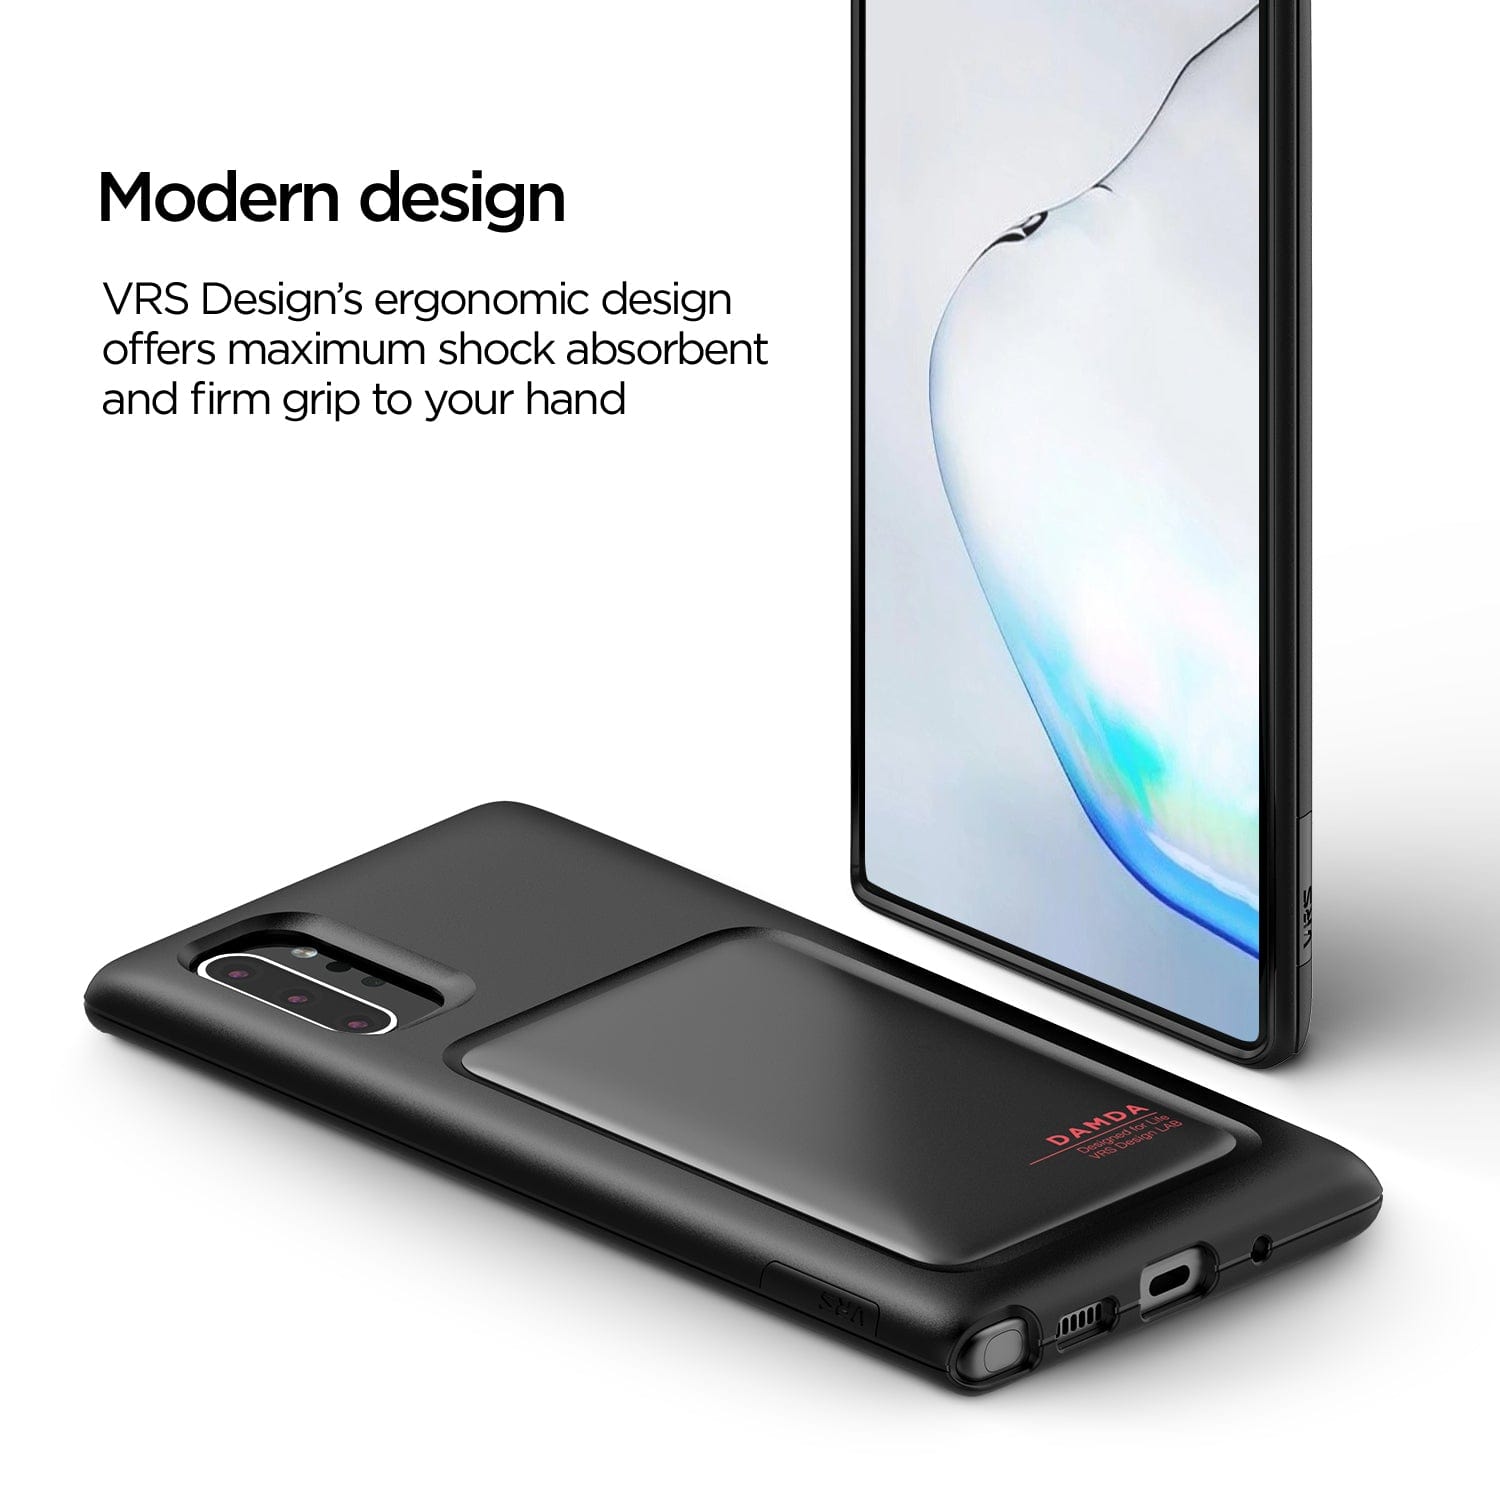 VRS Design's ergonomic case provides maximum shock absorption and a firm grip, ensuring comfortable and secure handling of your device.